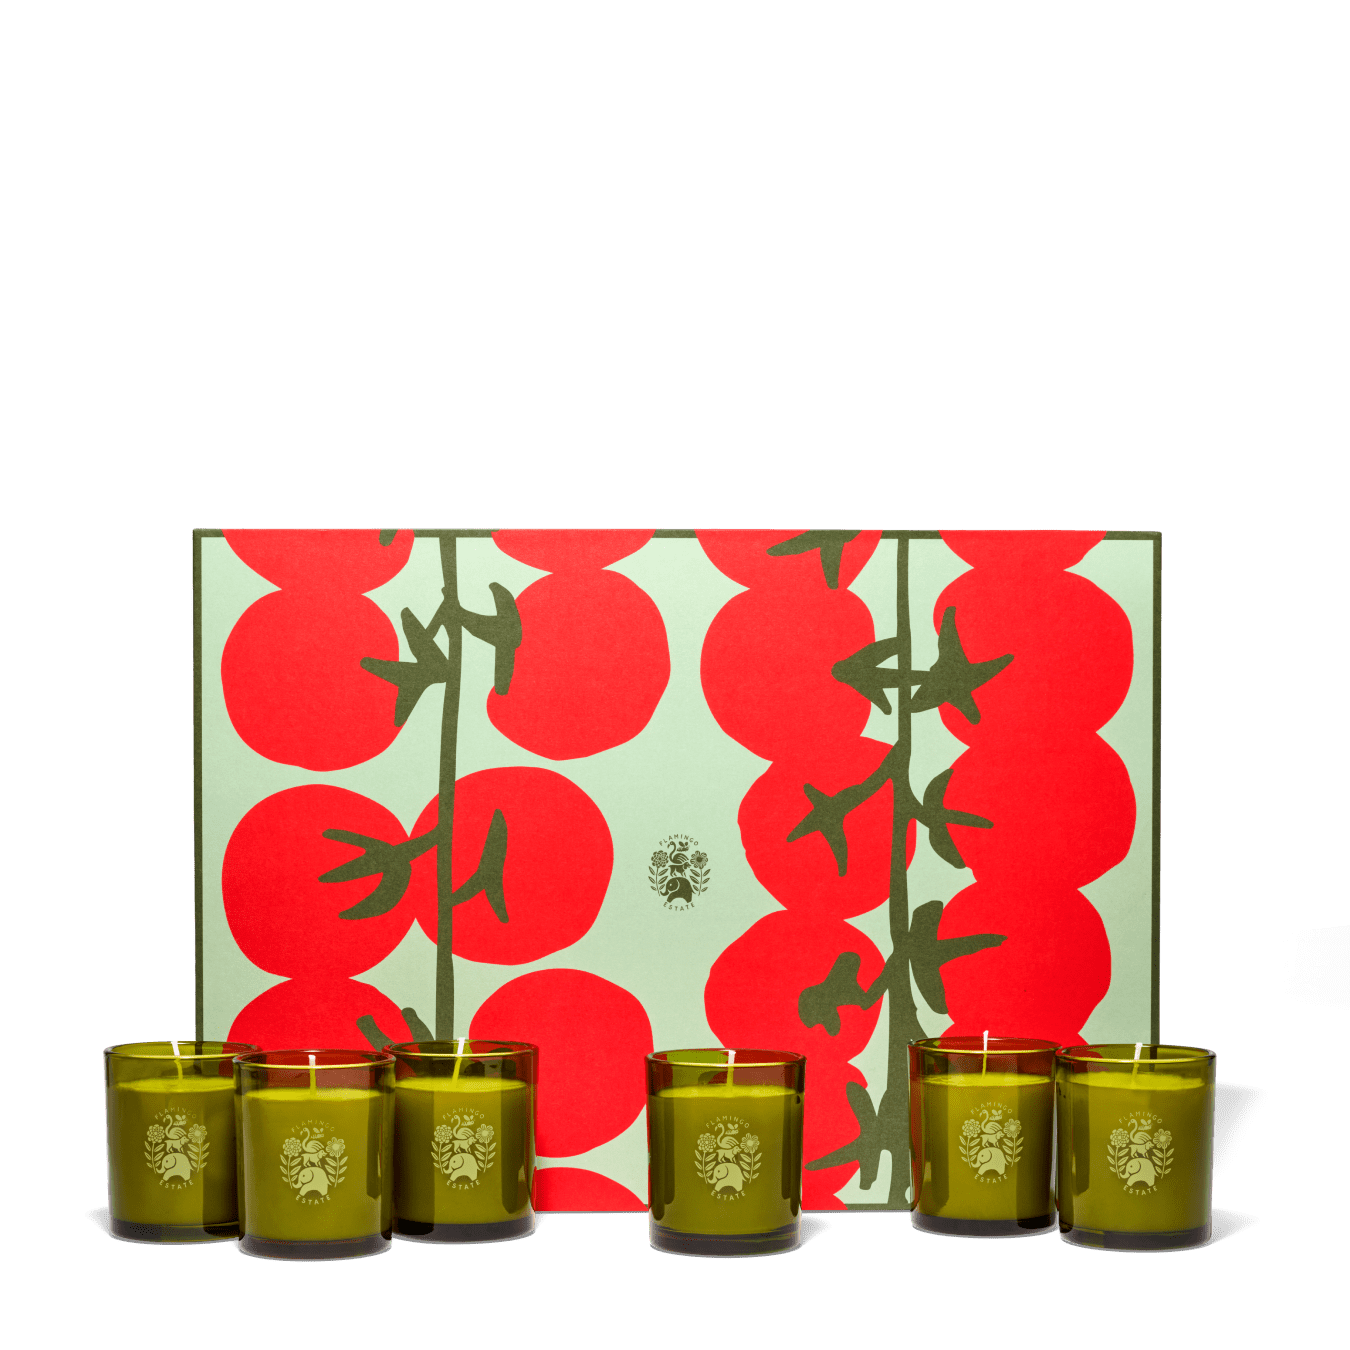 A Set Of Six Candles Arranged In Front Of A Vibrant Box Featuring Red Tomatoes